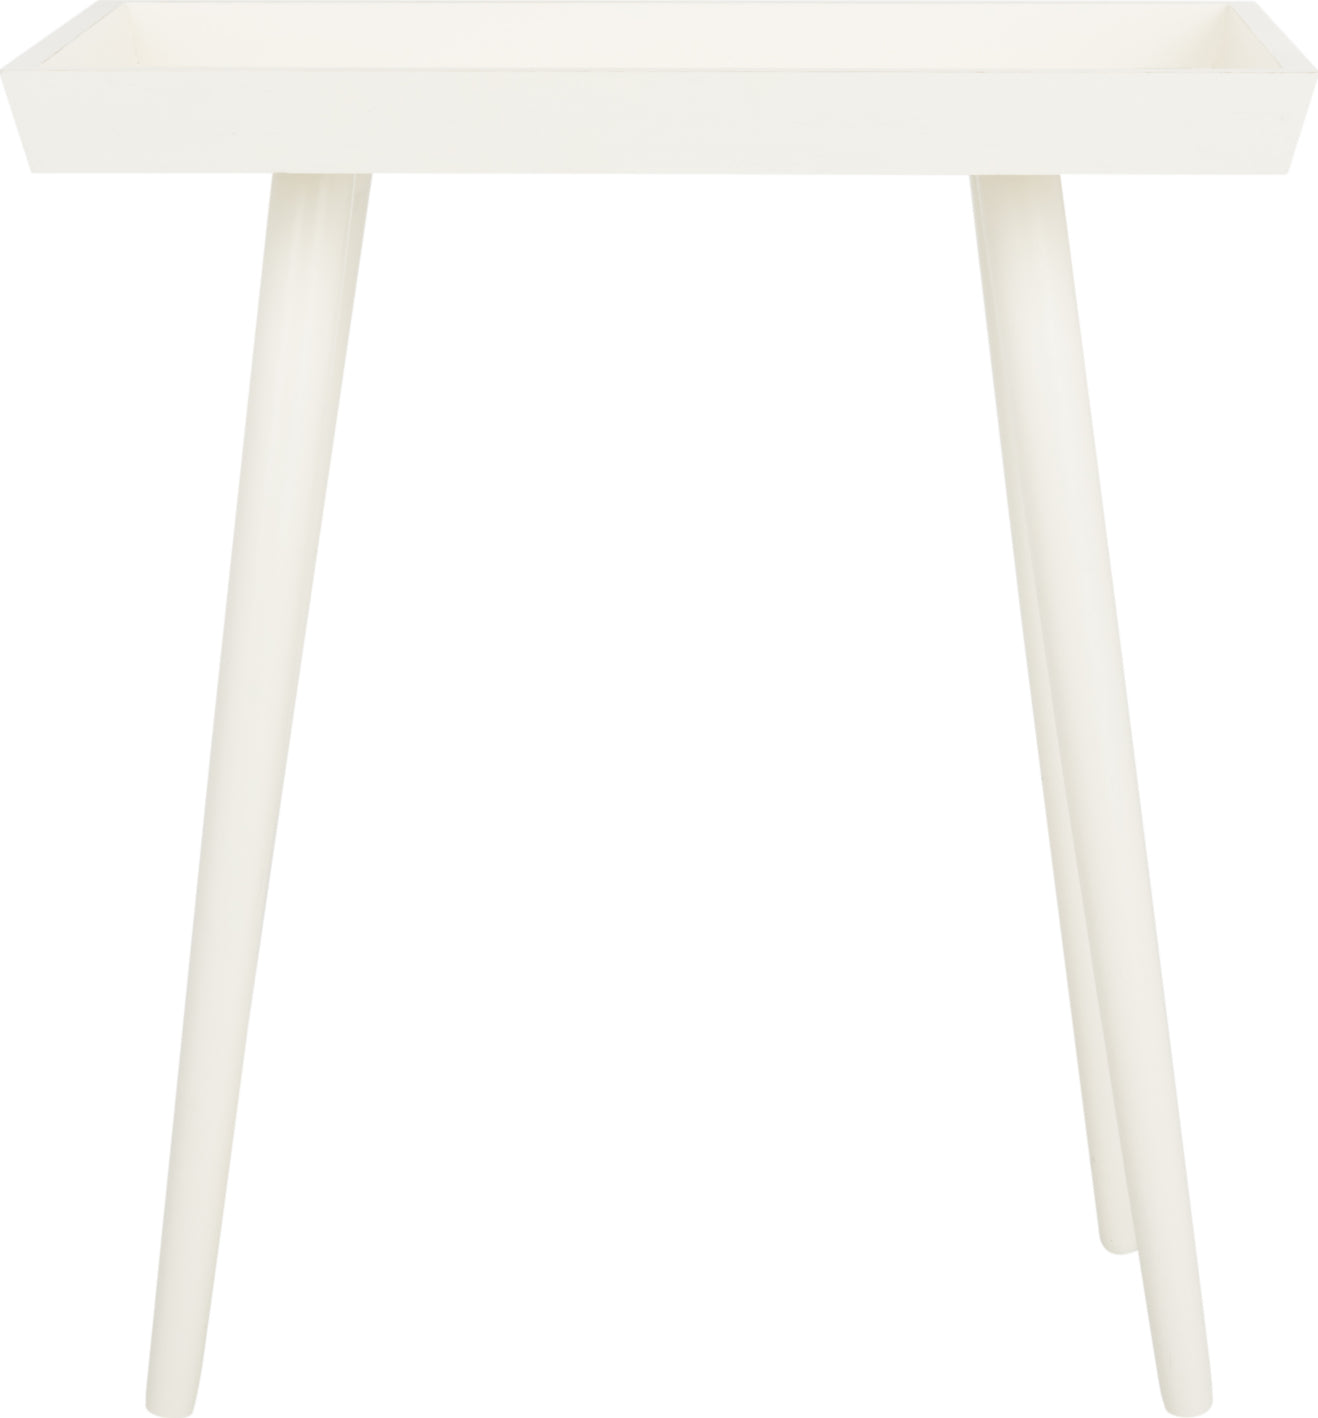 Safavieh Nonie Tray Accent Table Distressed White Furniture main image